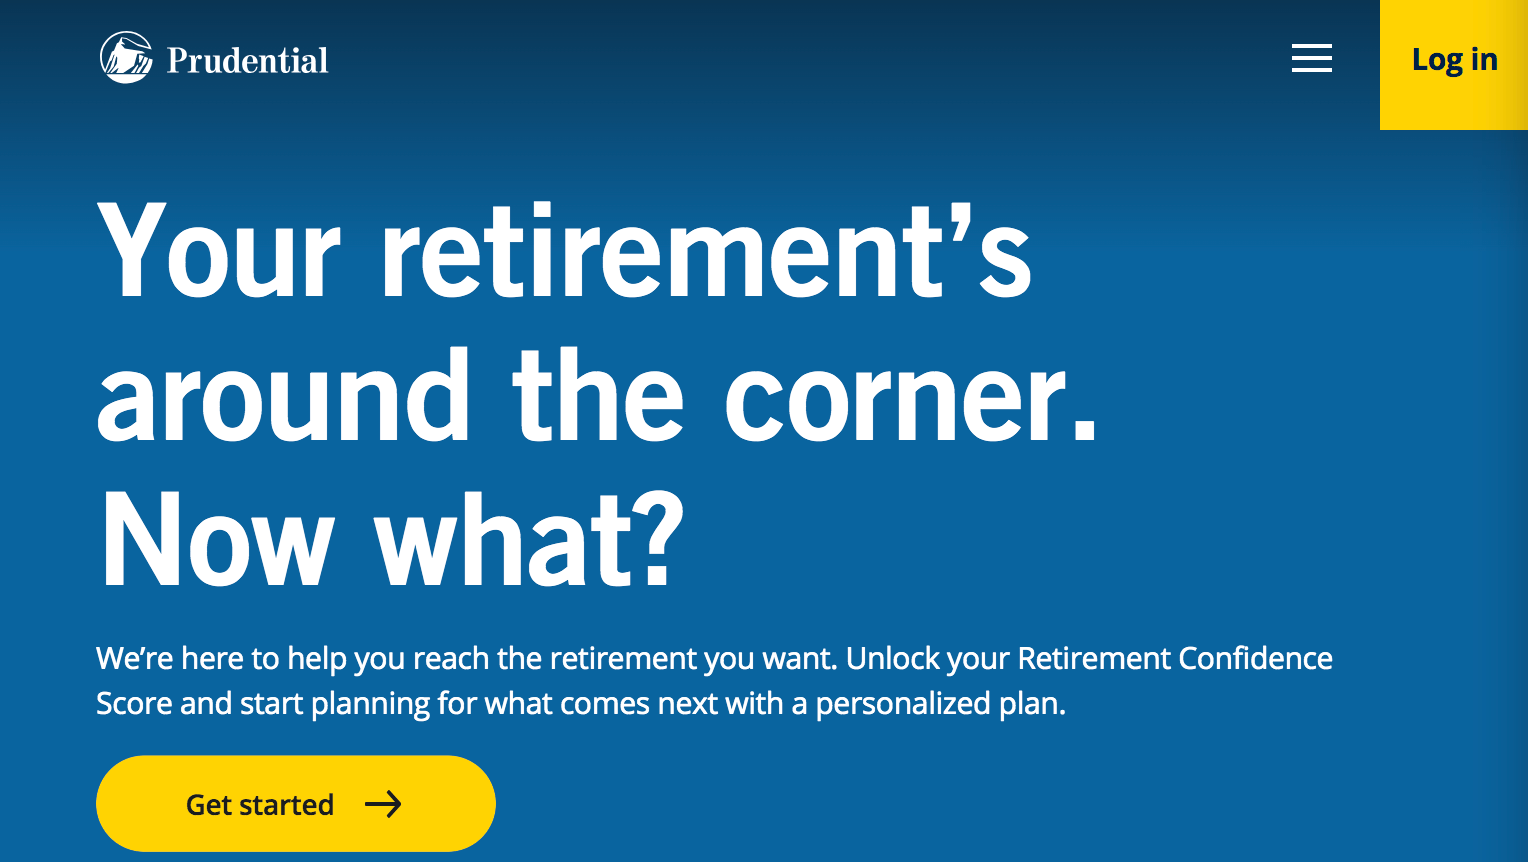 Homepage for Prudential Financial